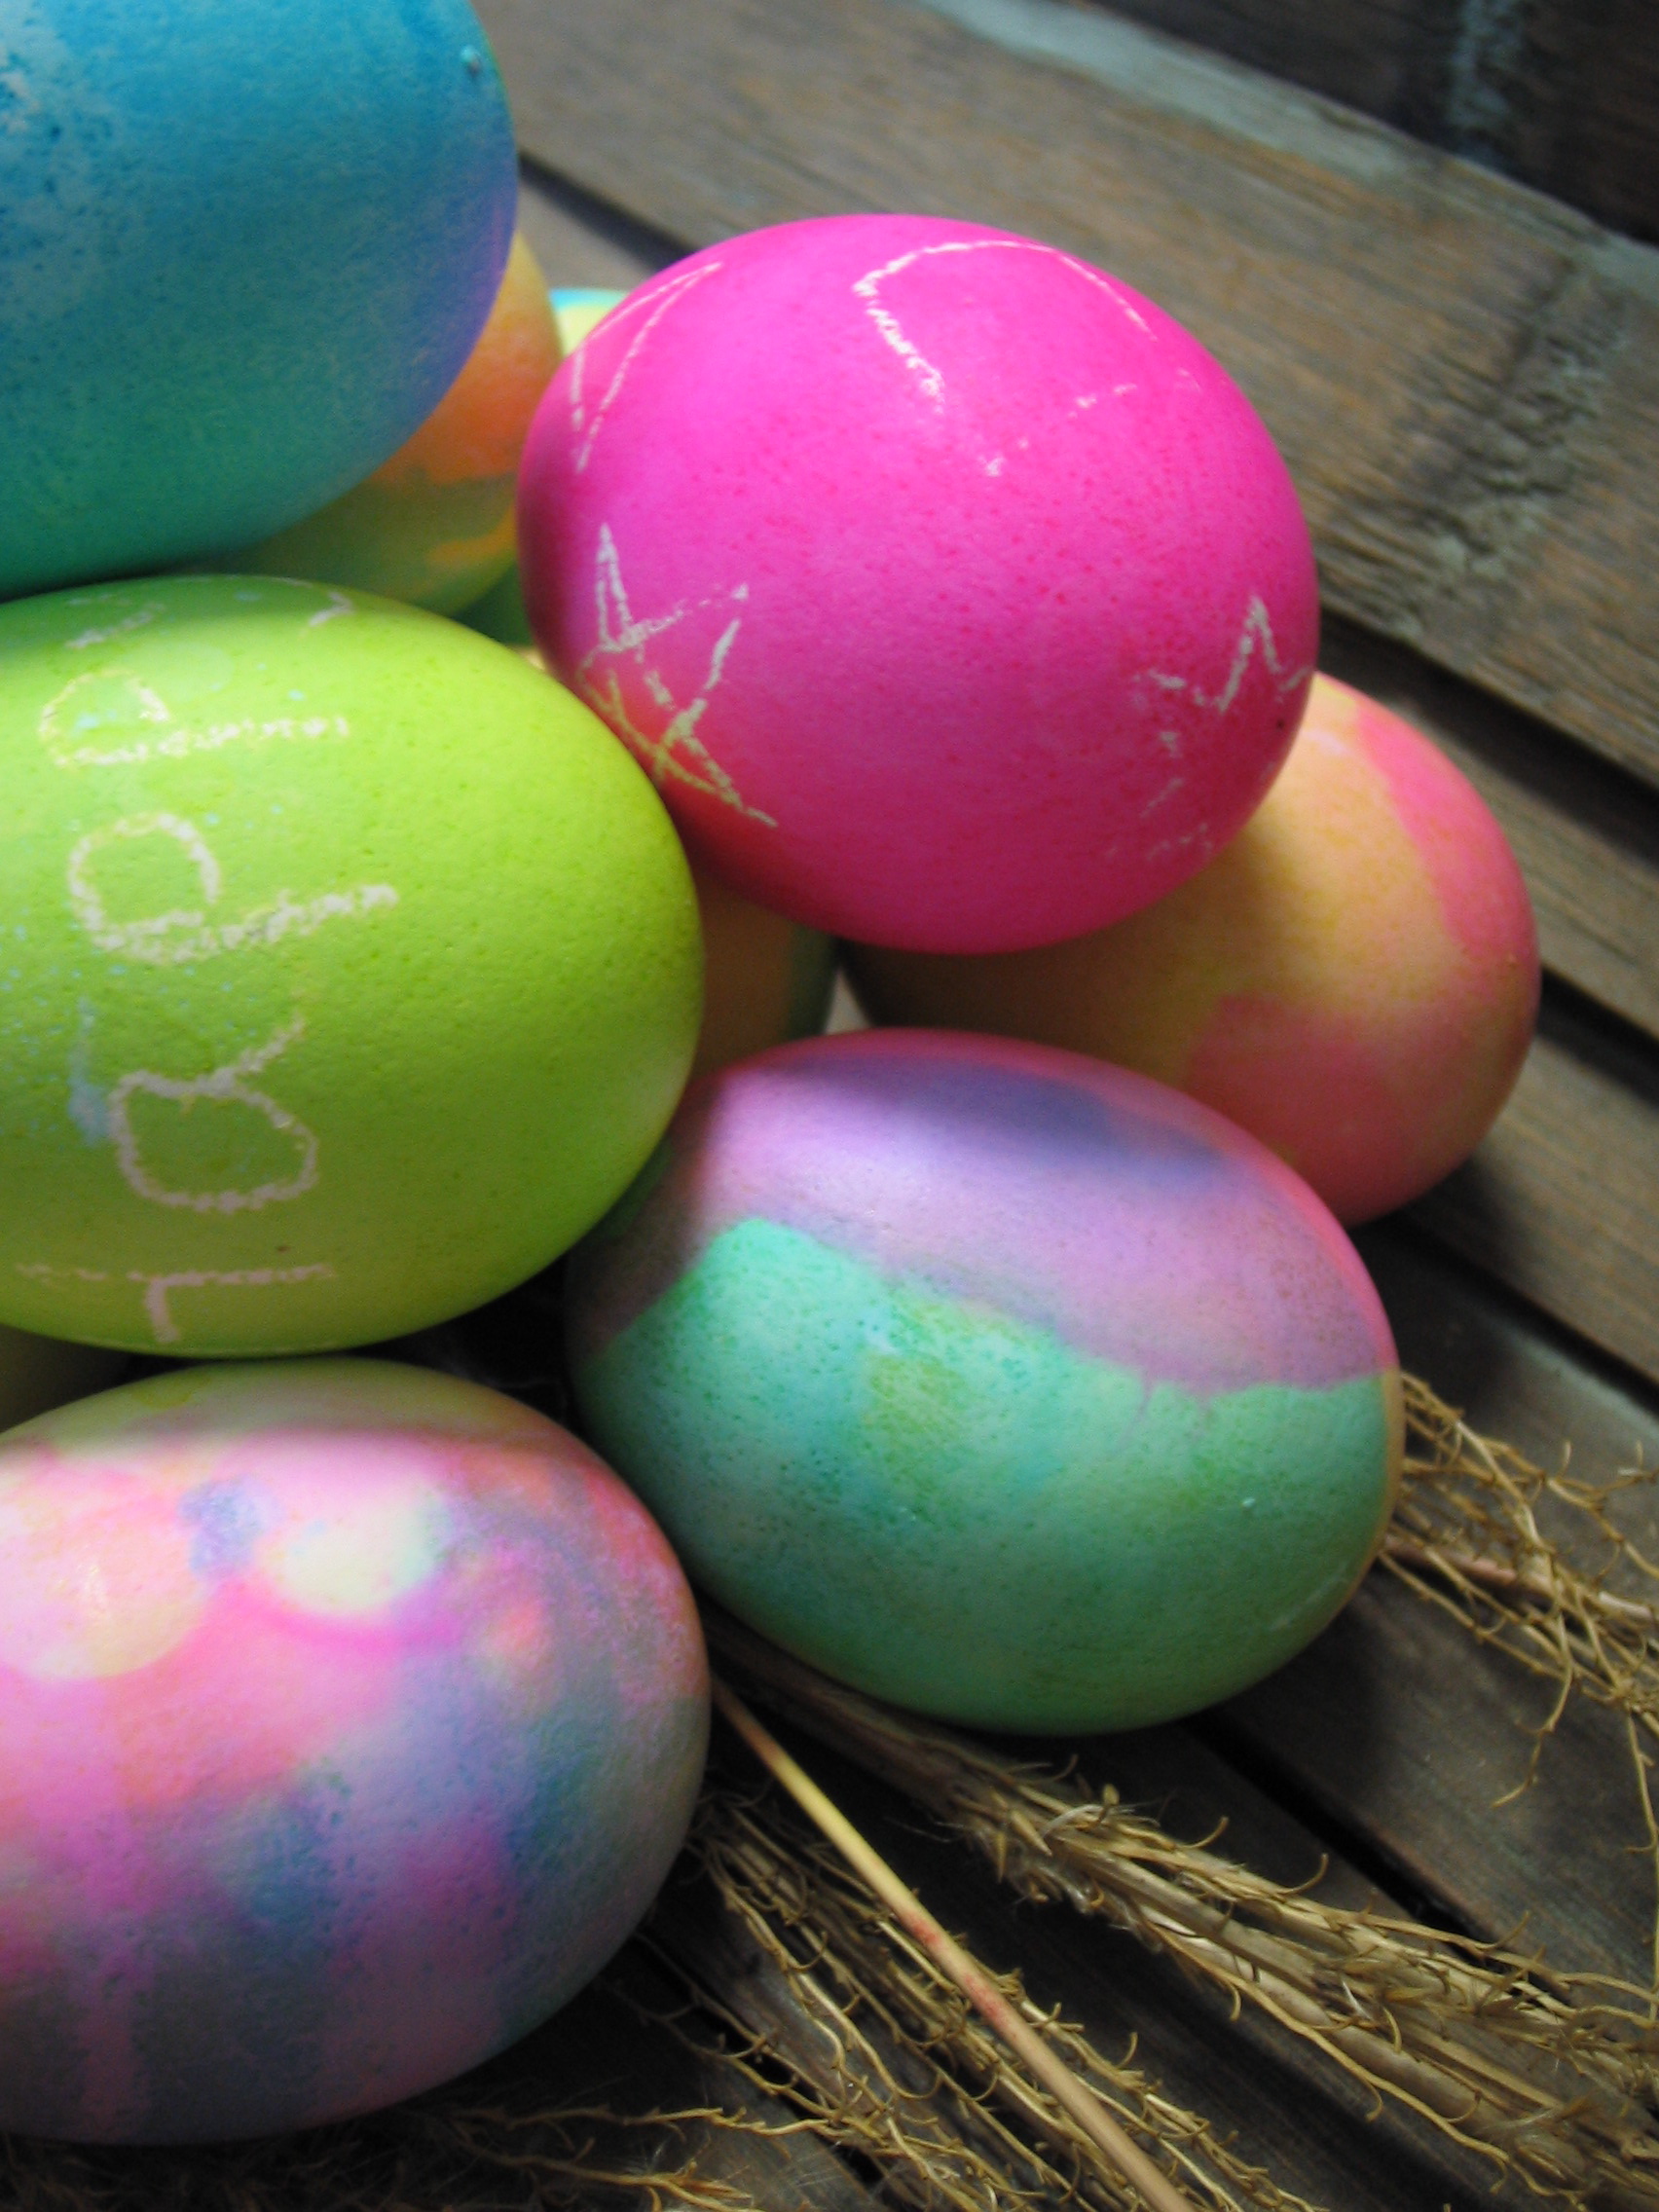 Amazing Easter Eggs: Fun, Festive & Unique Ways to Decorate Your Eggs